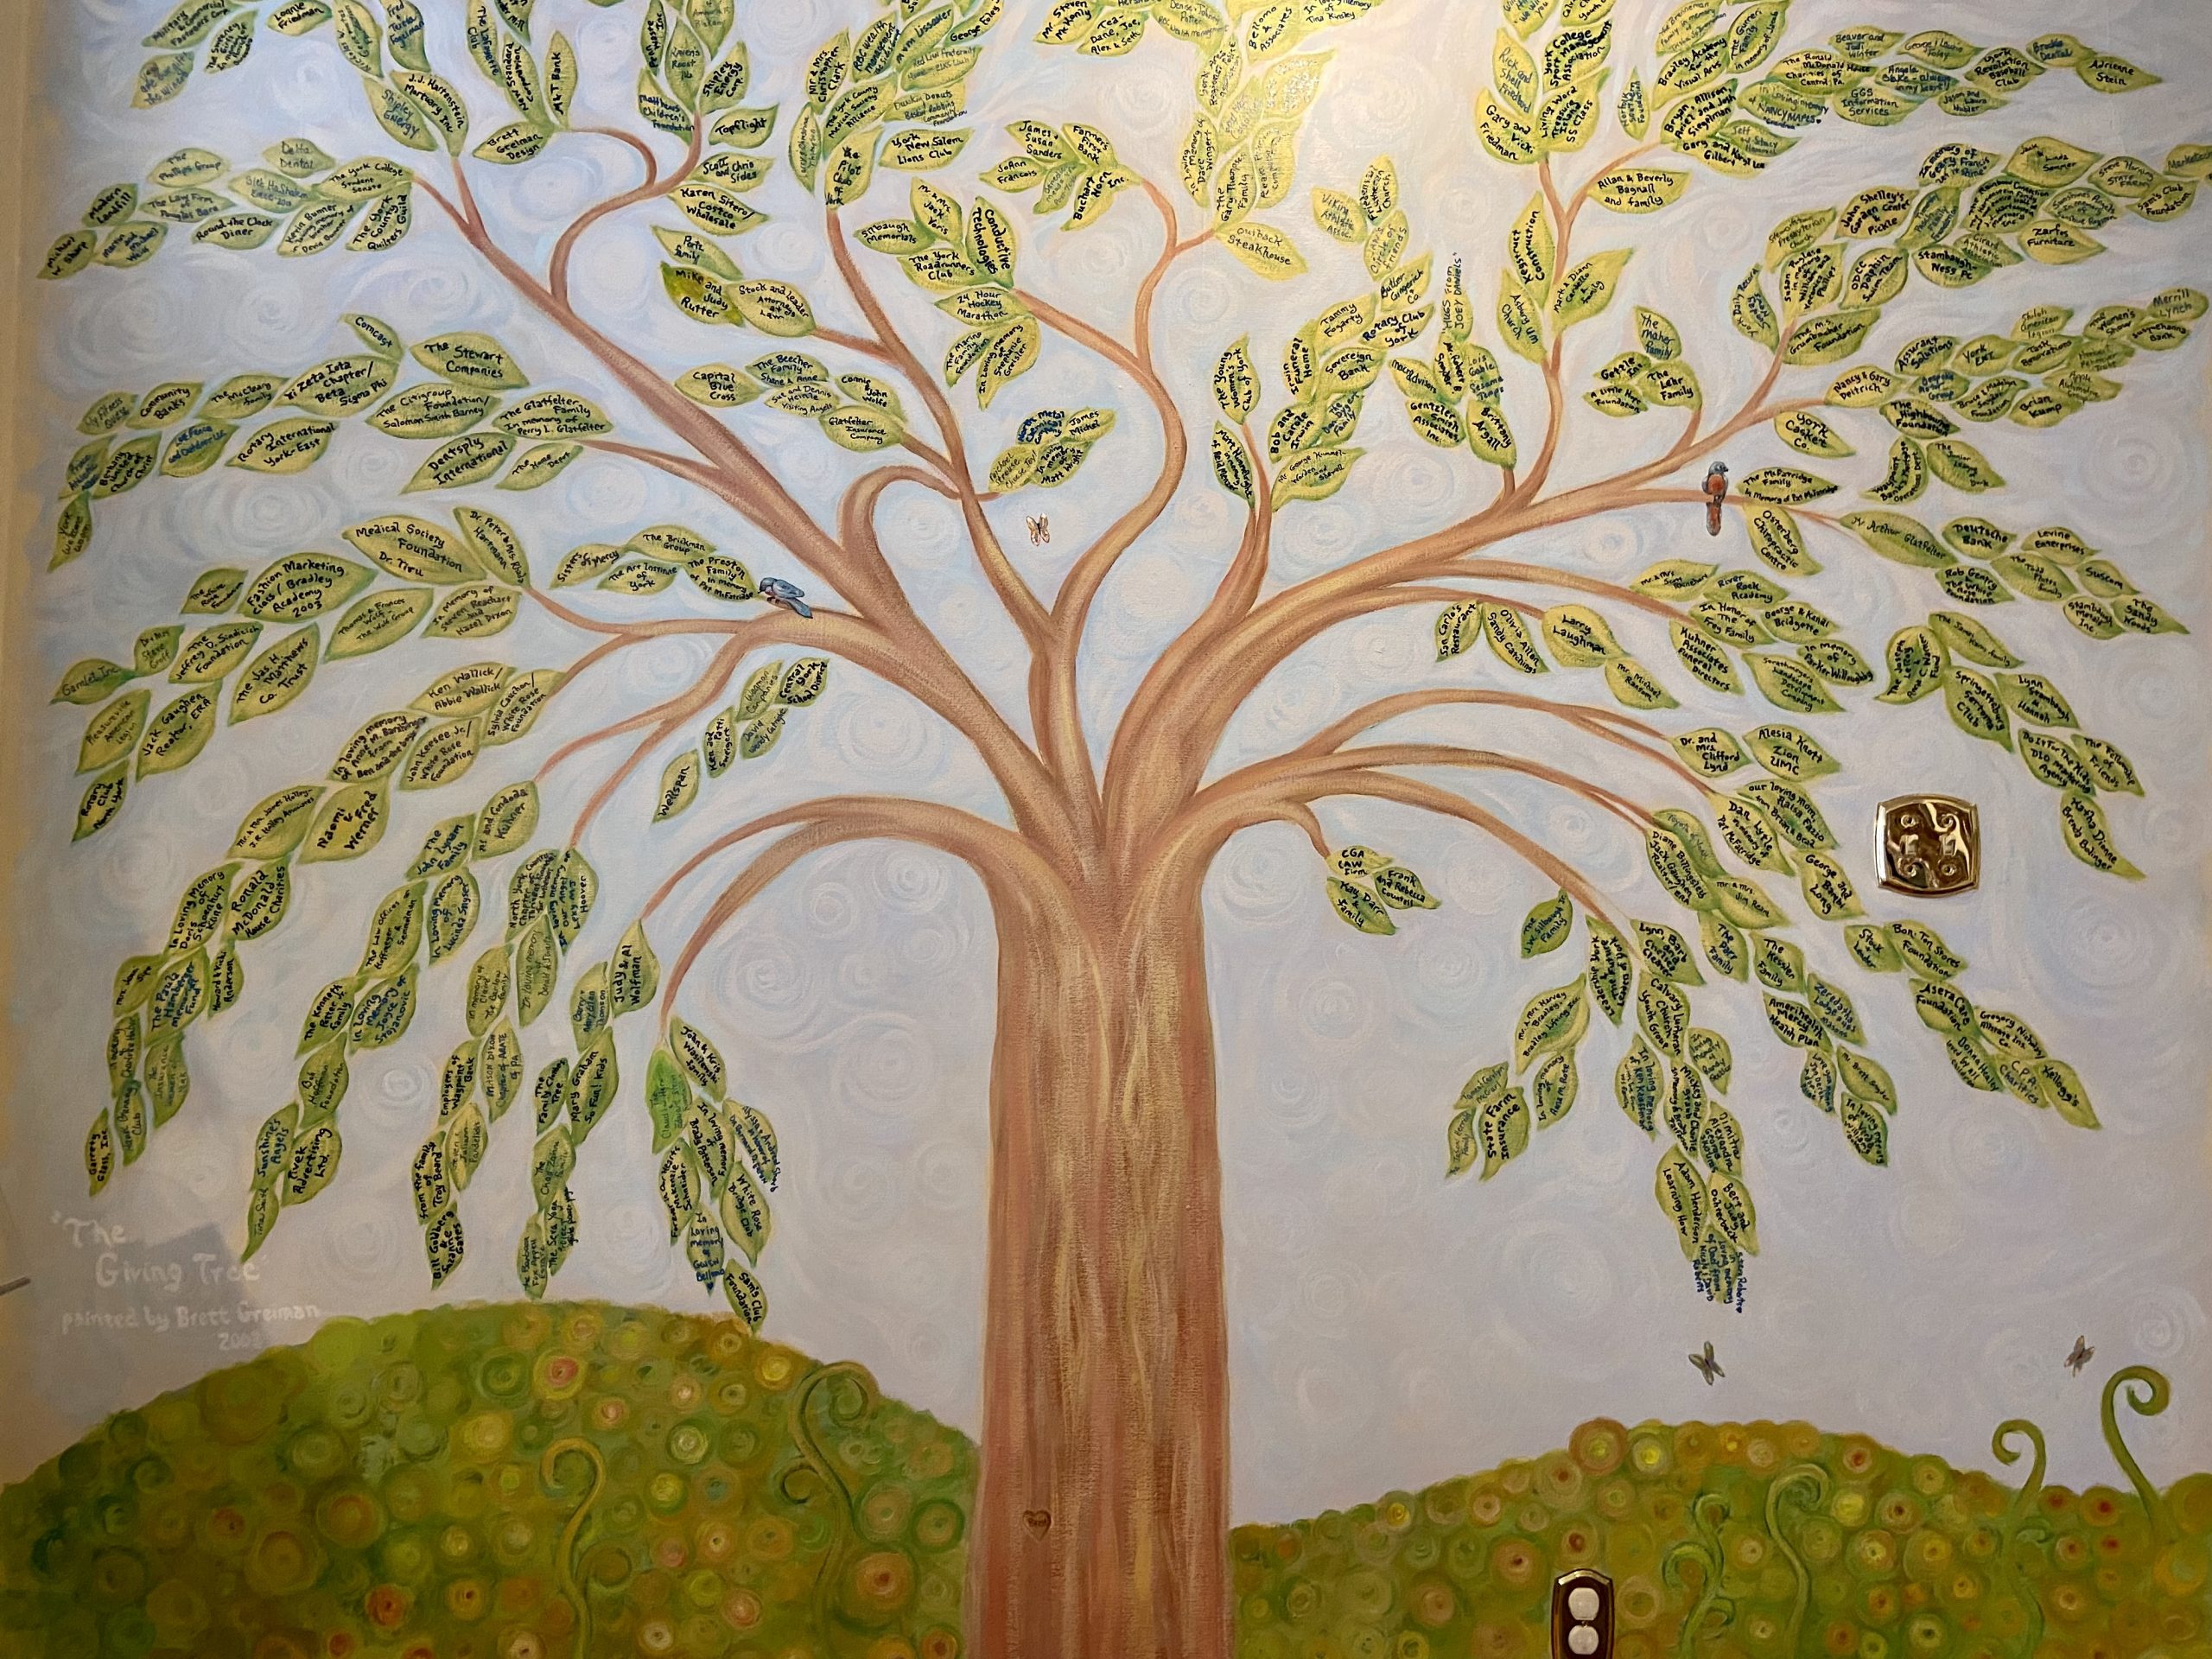 Located in the lending library and painted by artist Bret Greiman, the Olivia's House Giving Tree demonstrates how generous our community has been to the mission of Olivia's House. Any individual or organization that makes a gift of $1,000 or more gets to select a leaf to have their name permanently displayed.